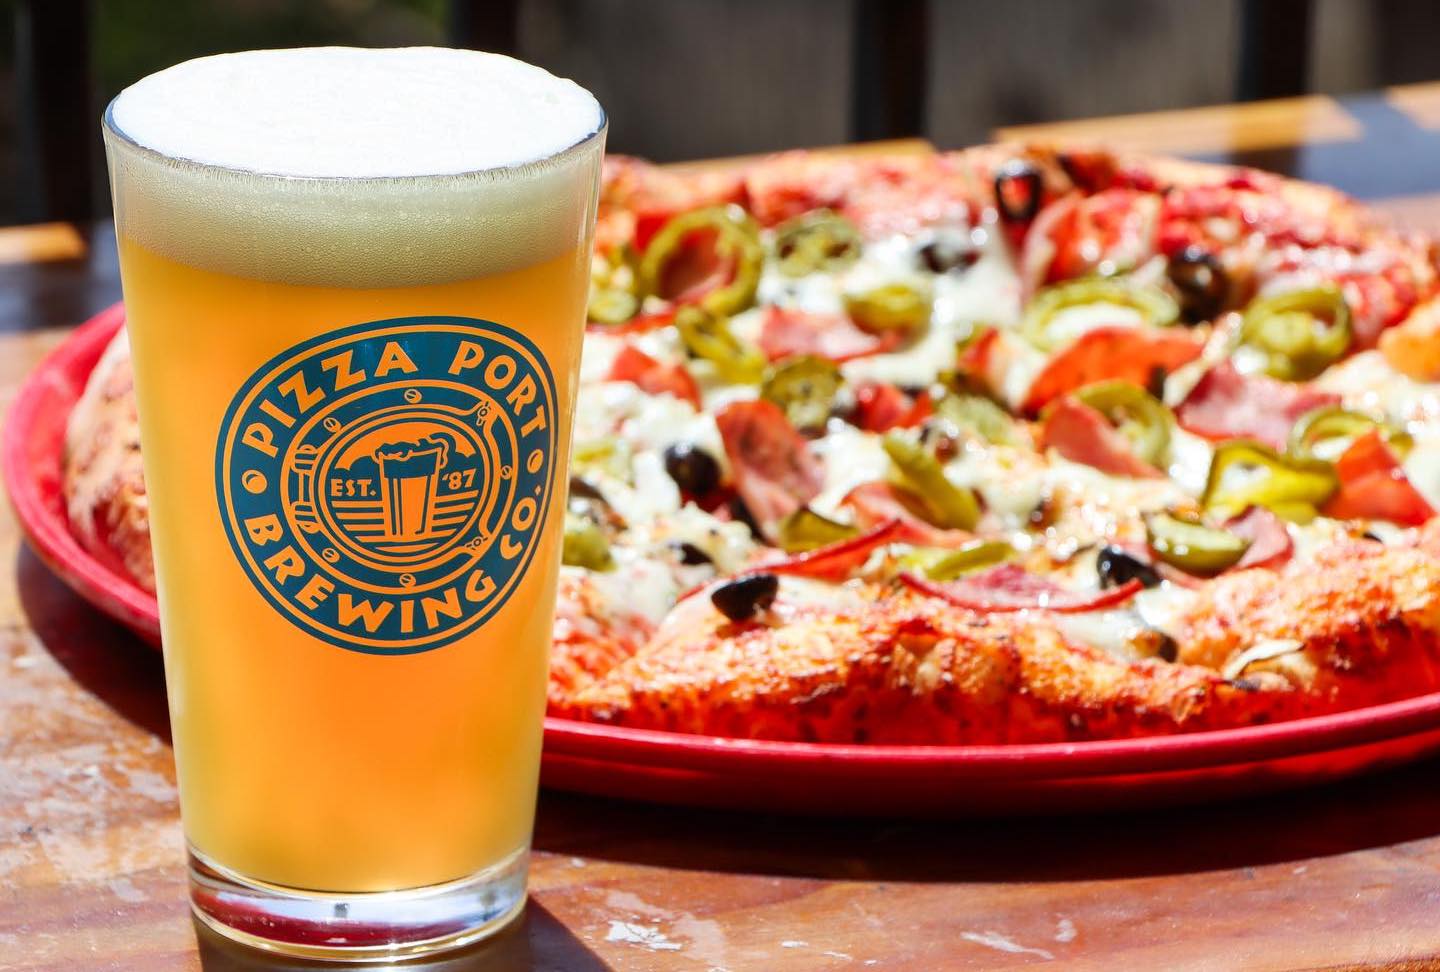 Pizza Port Brewing Company's new location at Belmont Park, San Diego featuring a glass of beer and a pizza